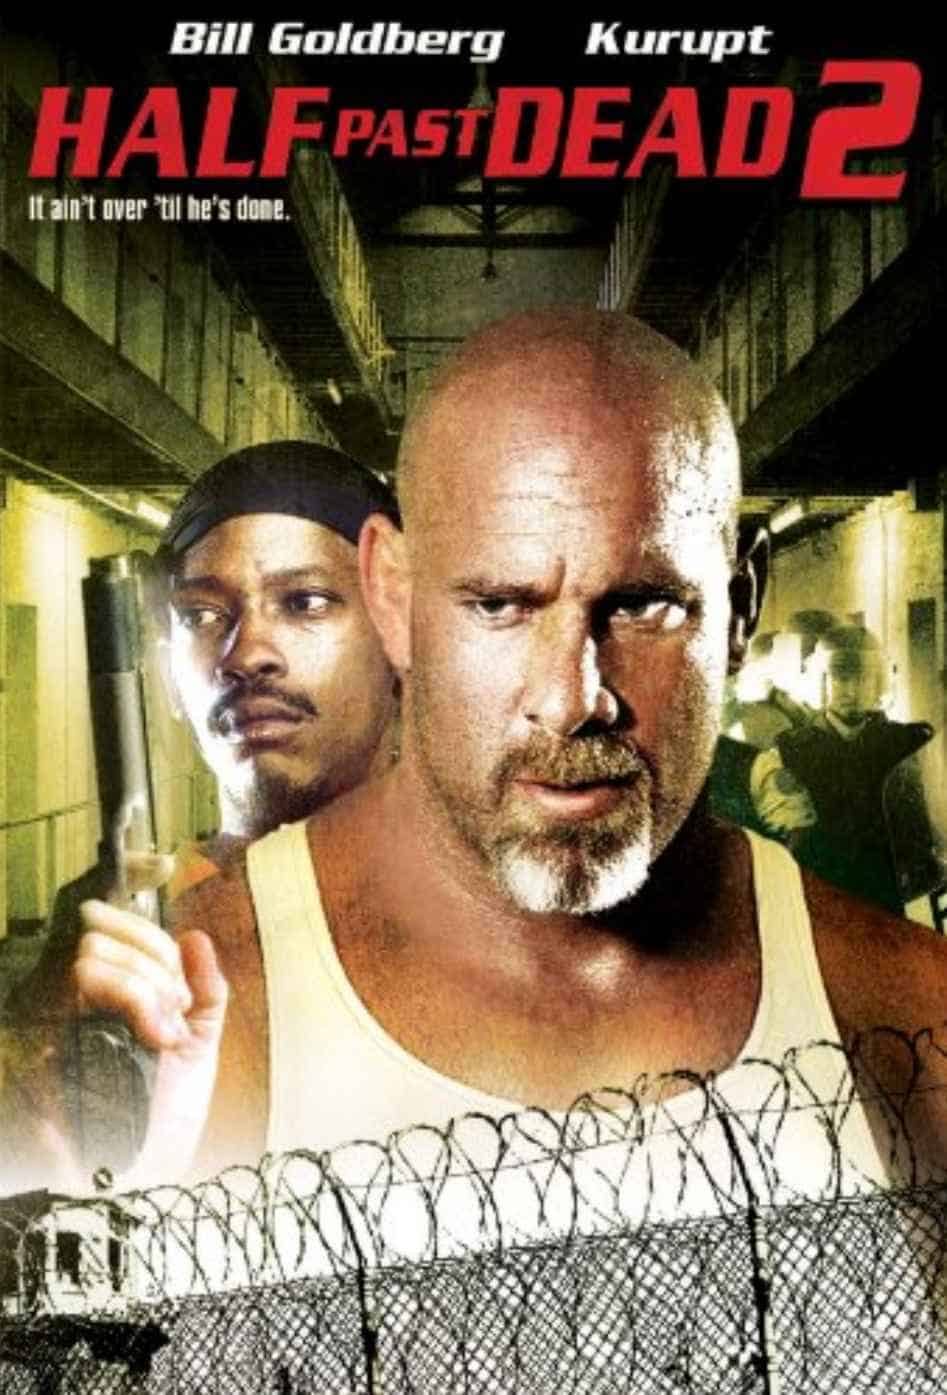 Best Prison Movies You Can't Miss Half Past Dead 2 (2007)